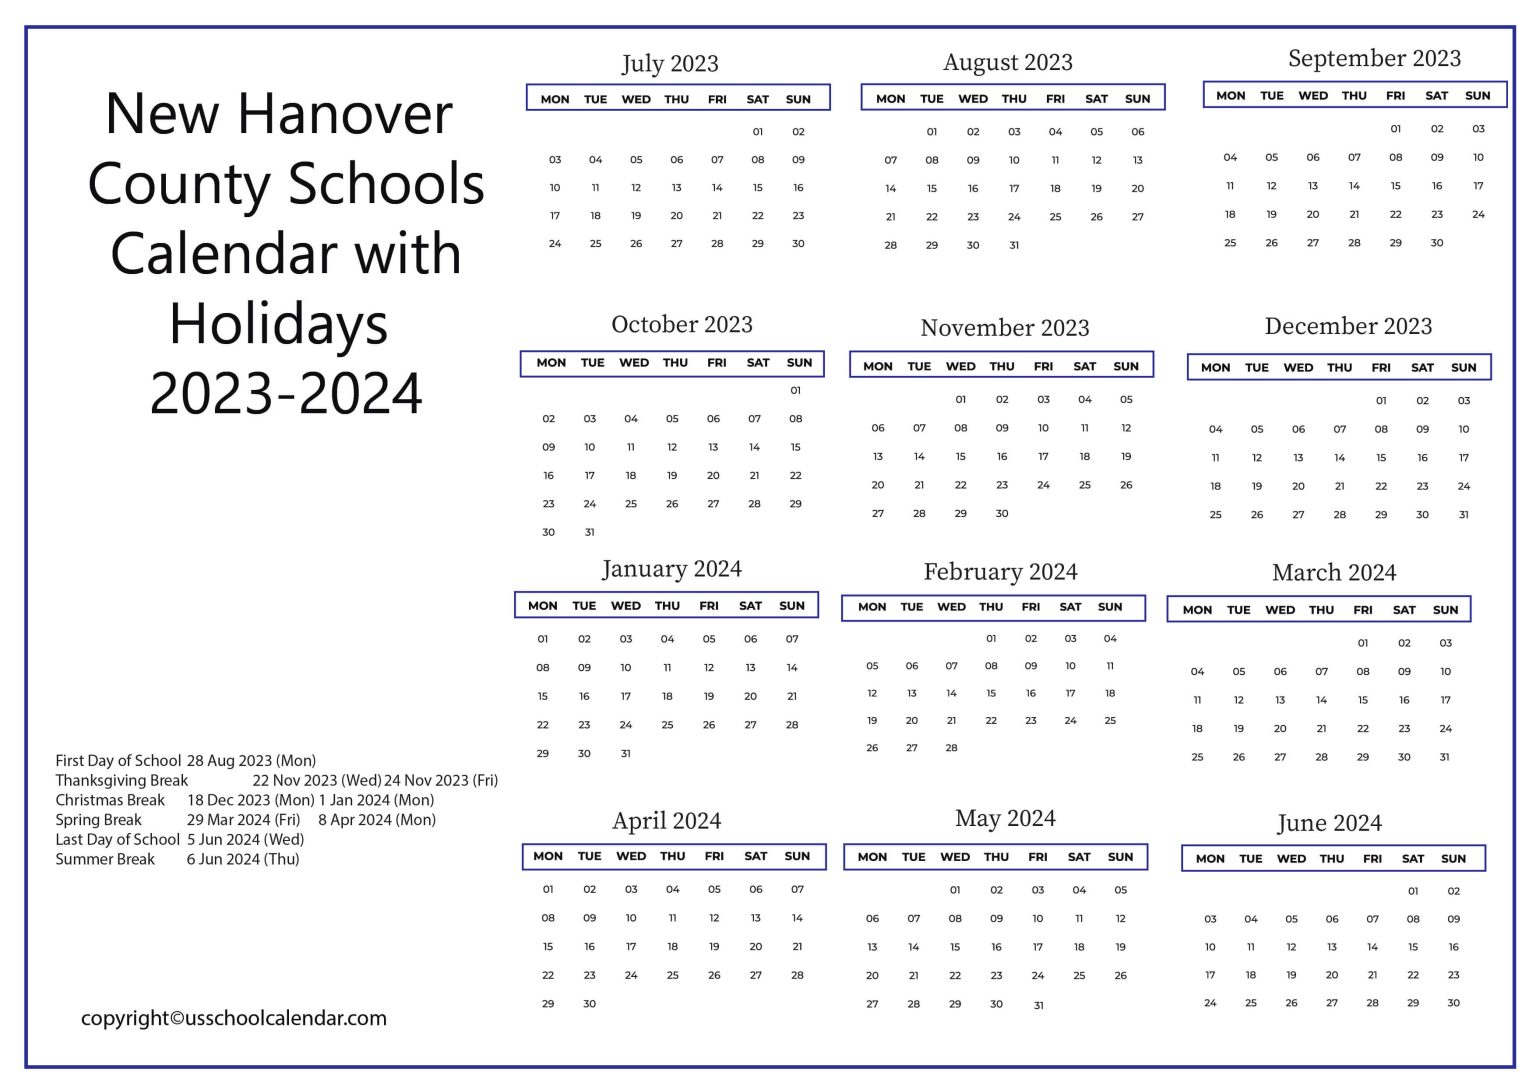 new-hanover-county-schools-calendar-with-holidays-2023-2024